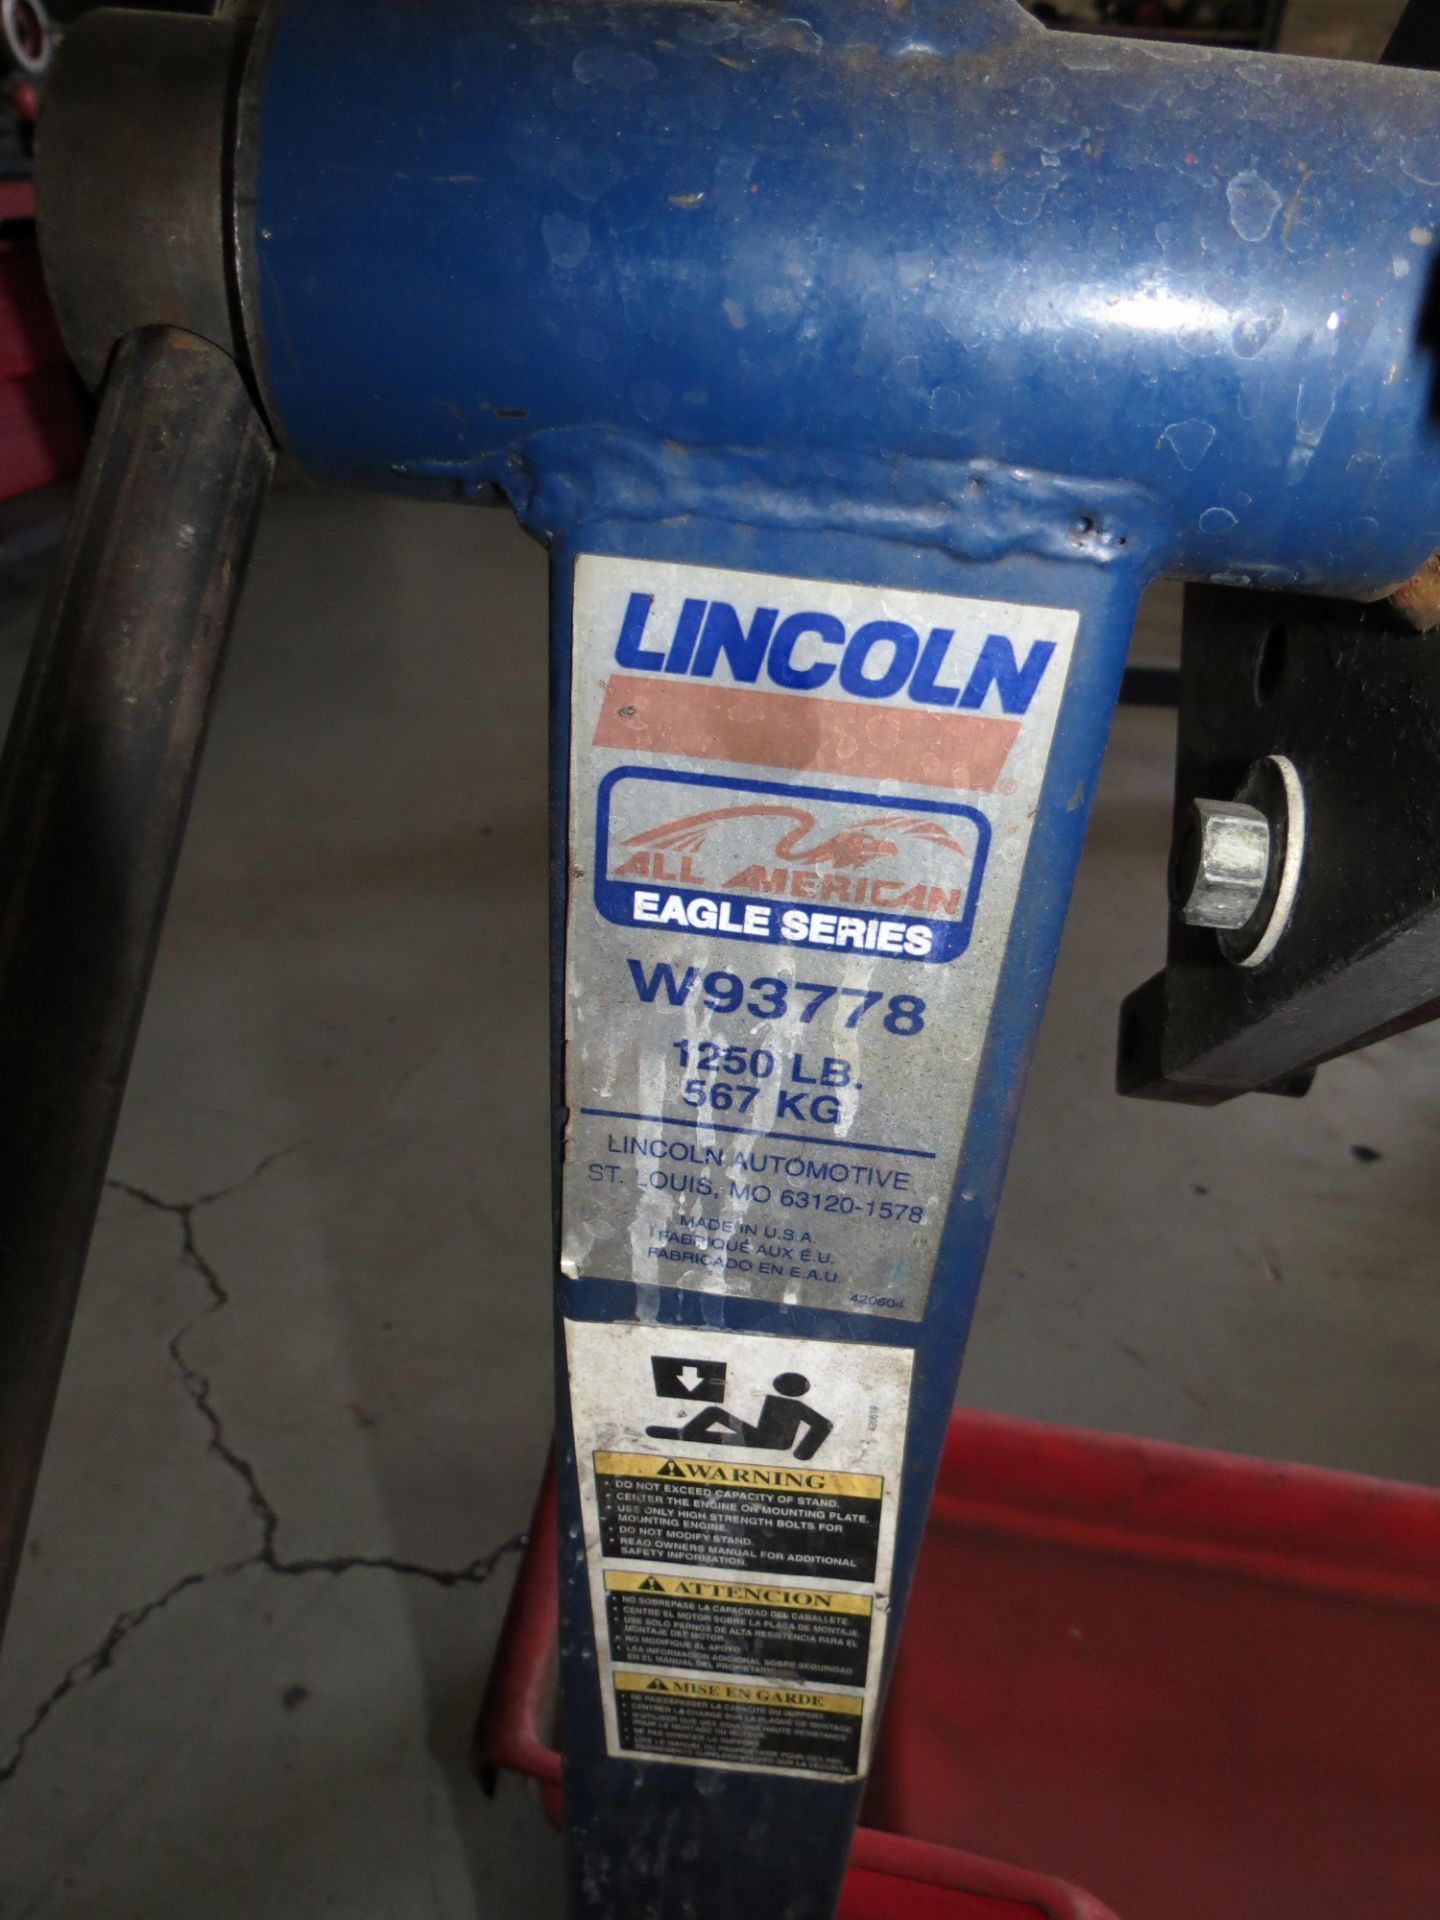 LINCOLN W93778 EAGLE SERIES ENGINE STAND 1250 LBS CAPACITY - Image 2 of 2